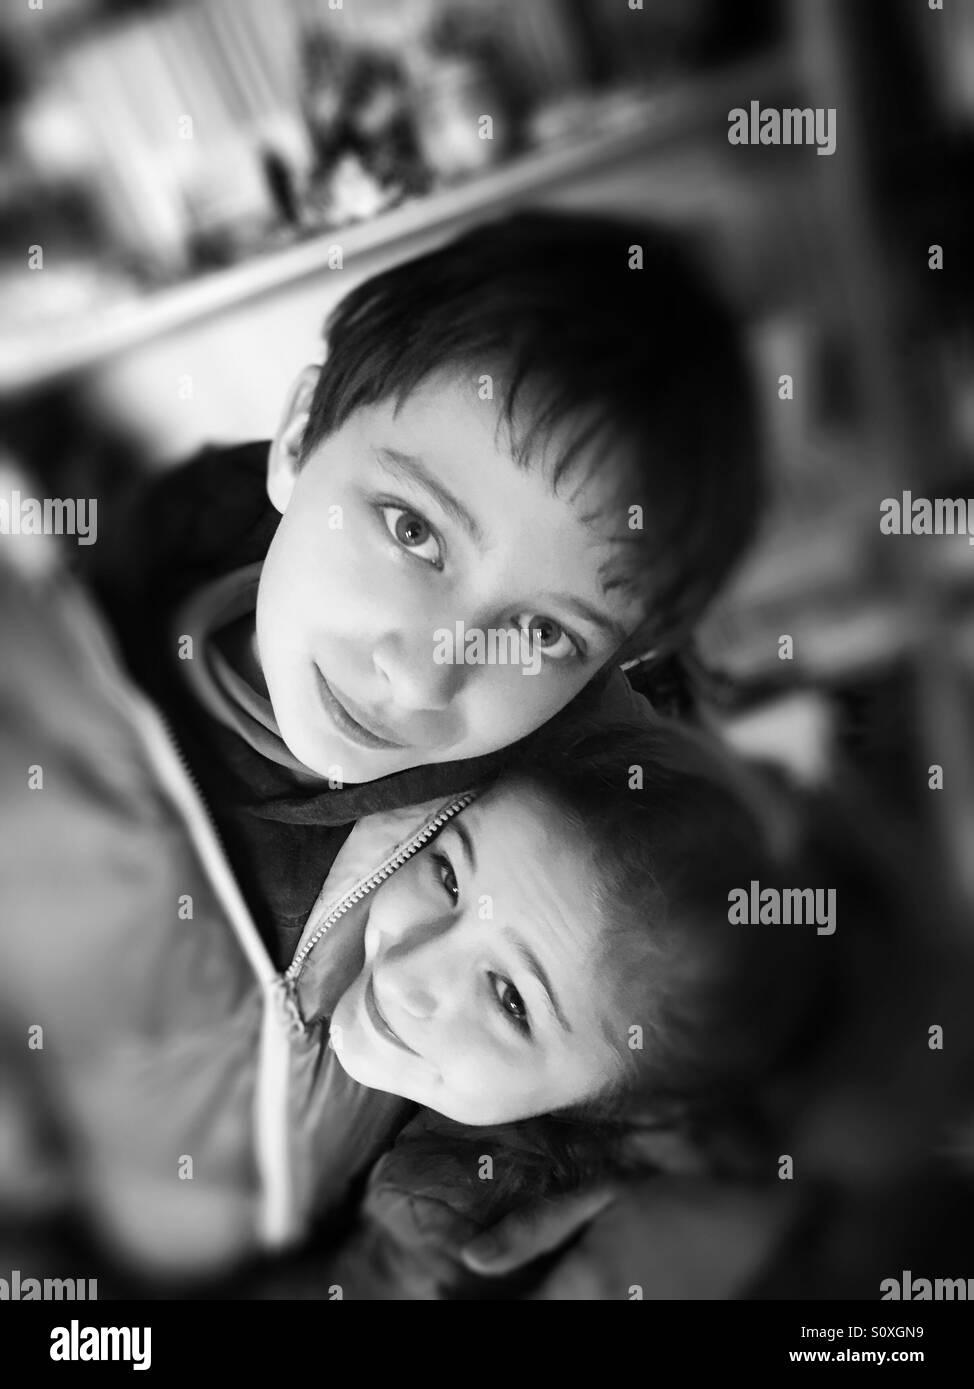 Brother sister hugging Black and White Stock Photos Images   Alamy